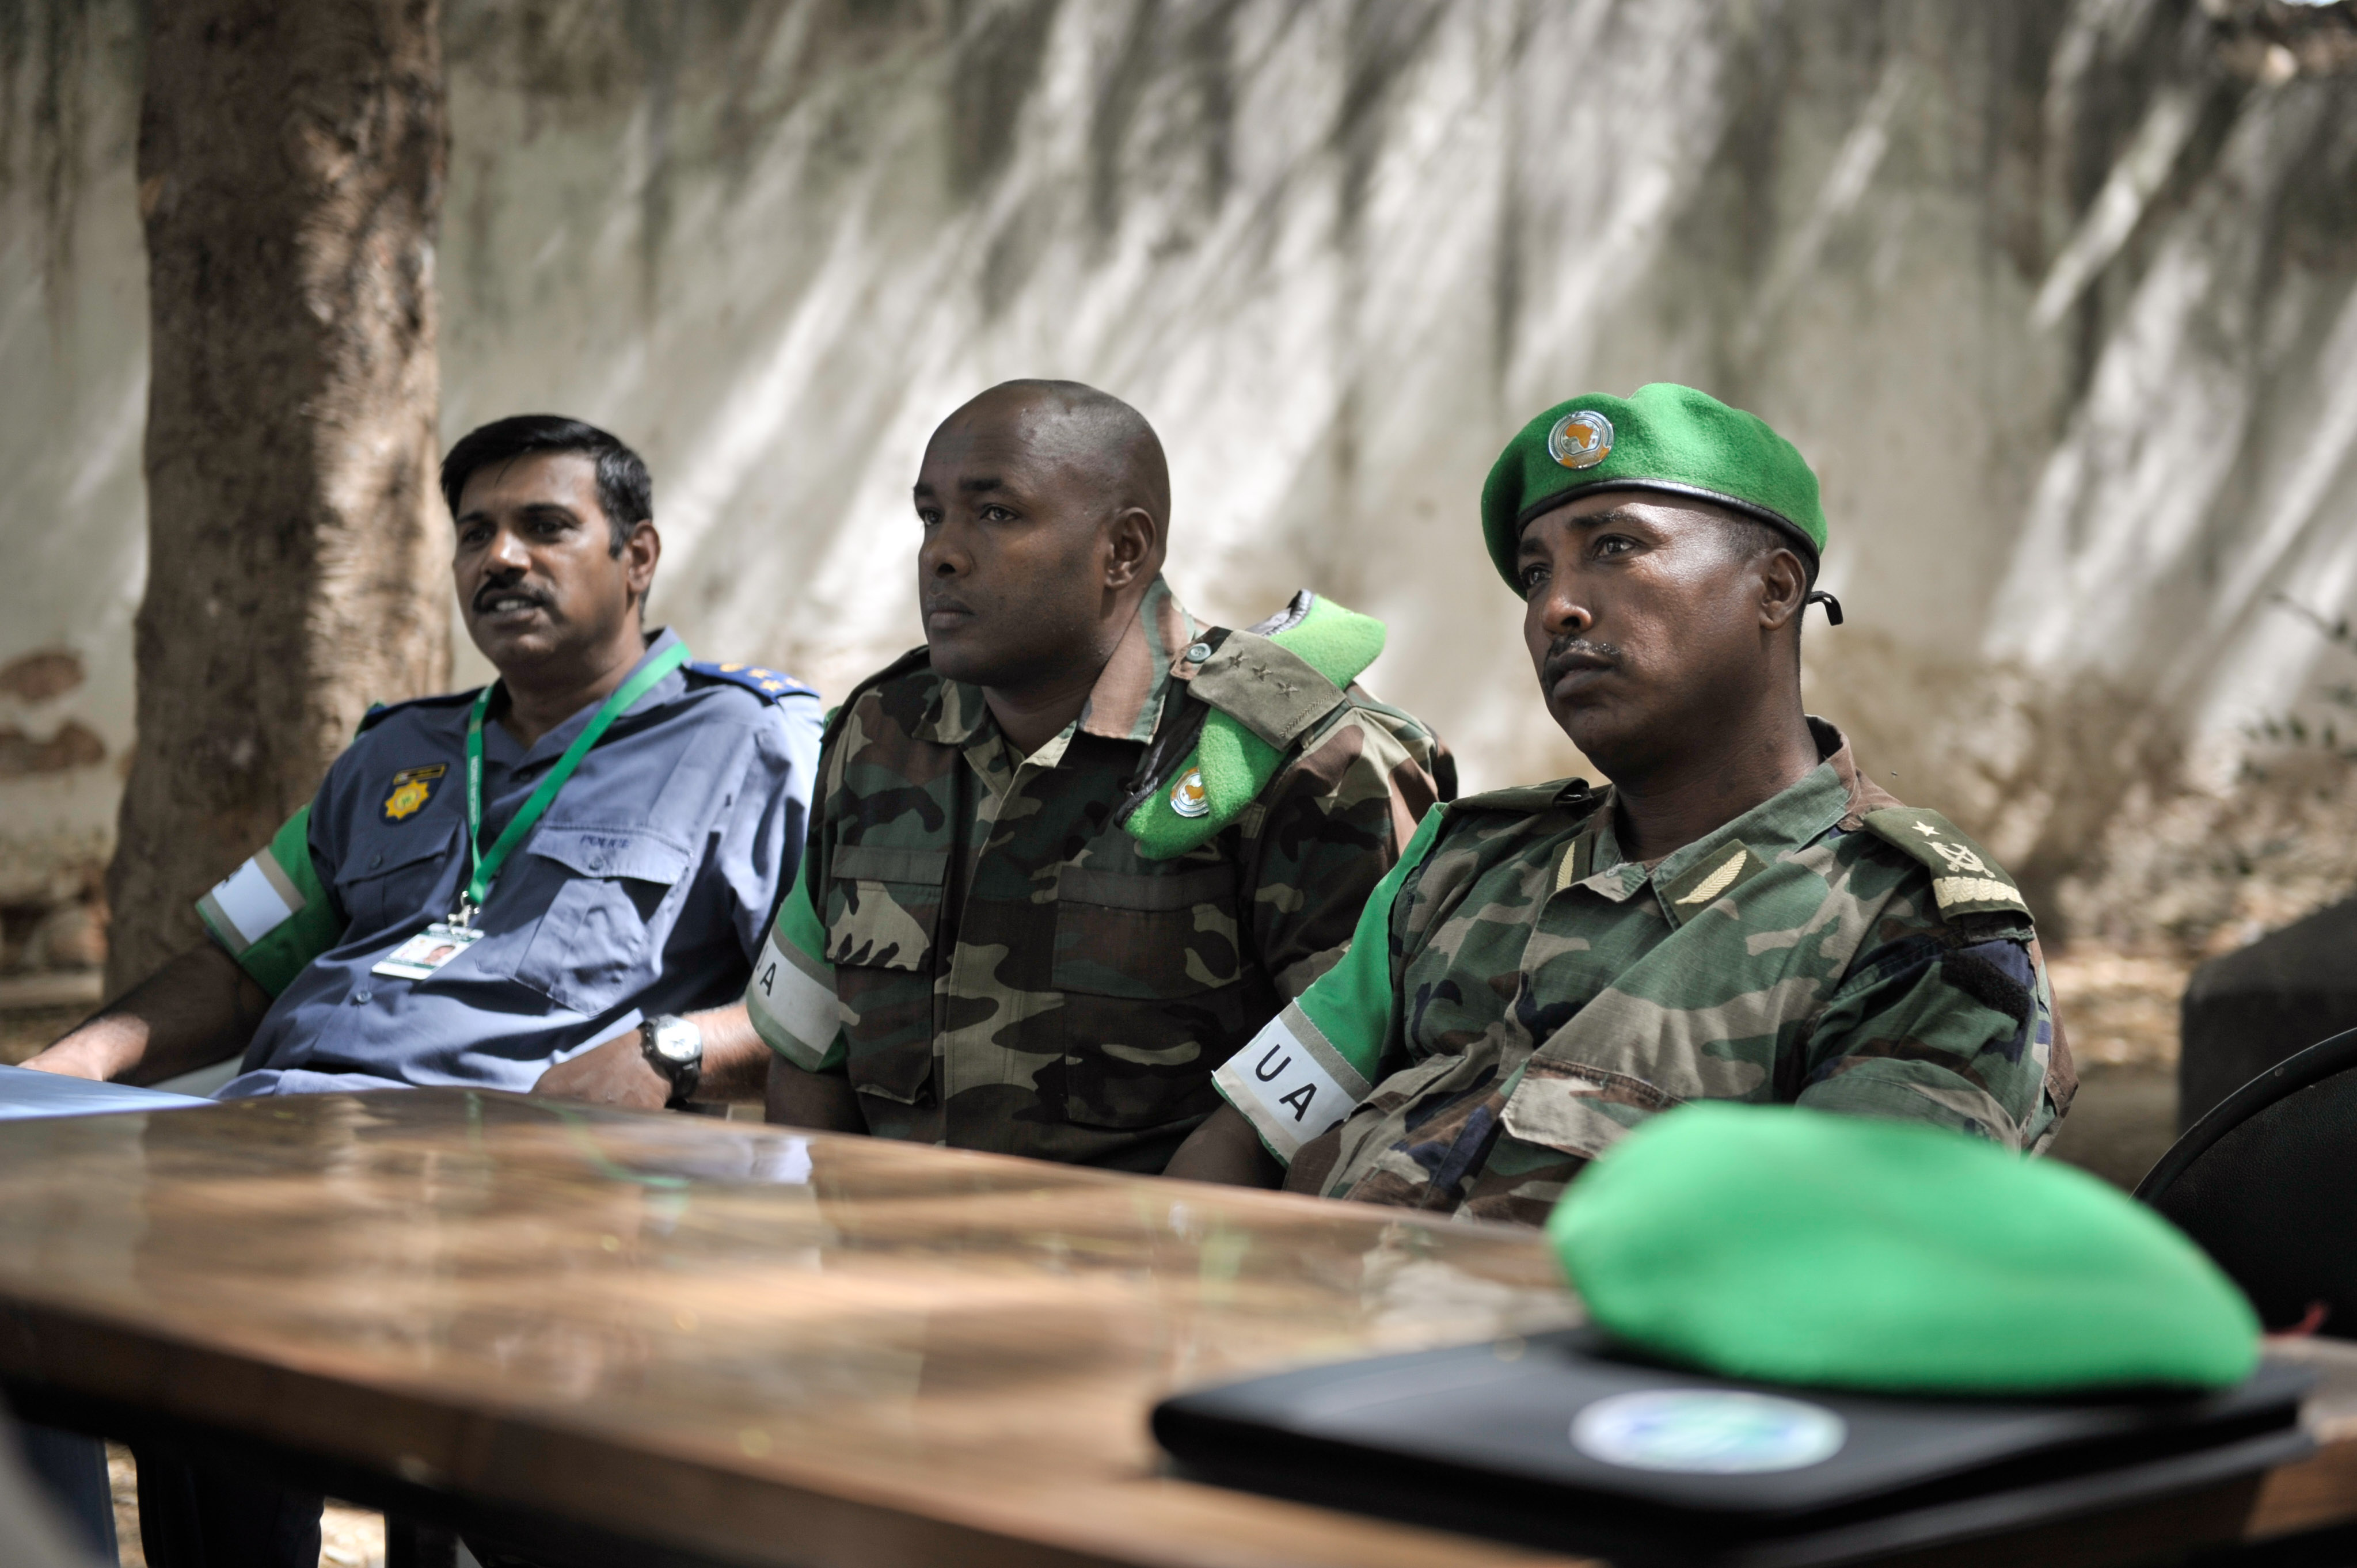 AMISOM Deputy Force Commander, Major General Geoffrey Baraba Muheesi, and AMISOM's new Police Commissioner, Anand Pillay, visit Baidoa, Somalia, on June 20. The two AMISOM officials were received by (14281132677)